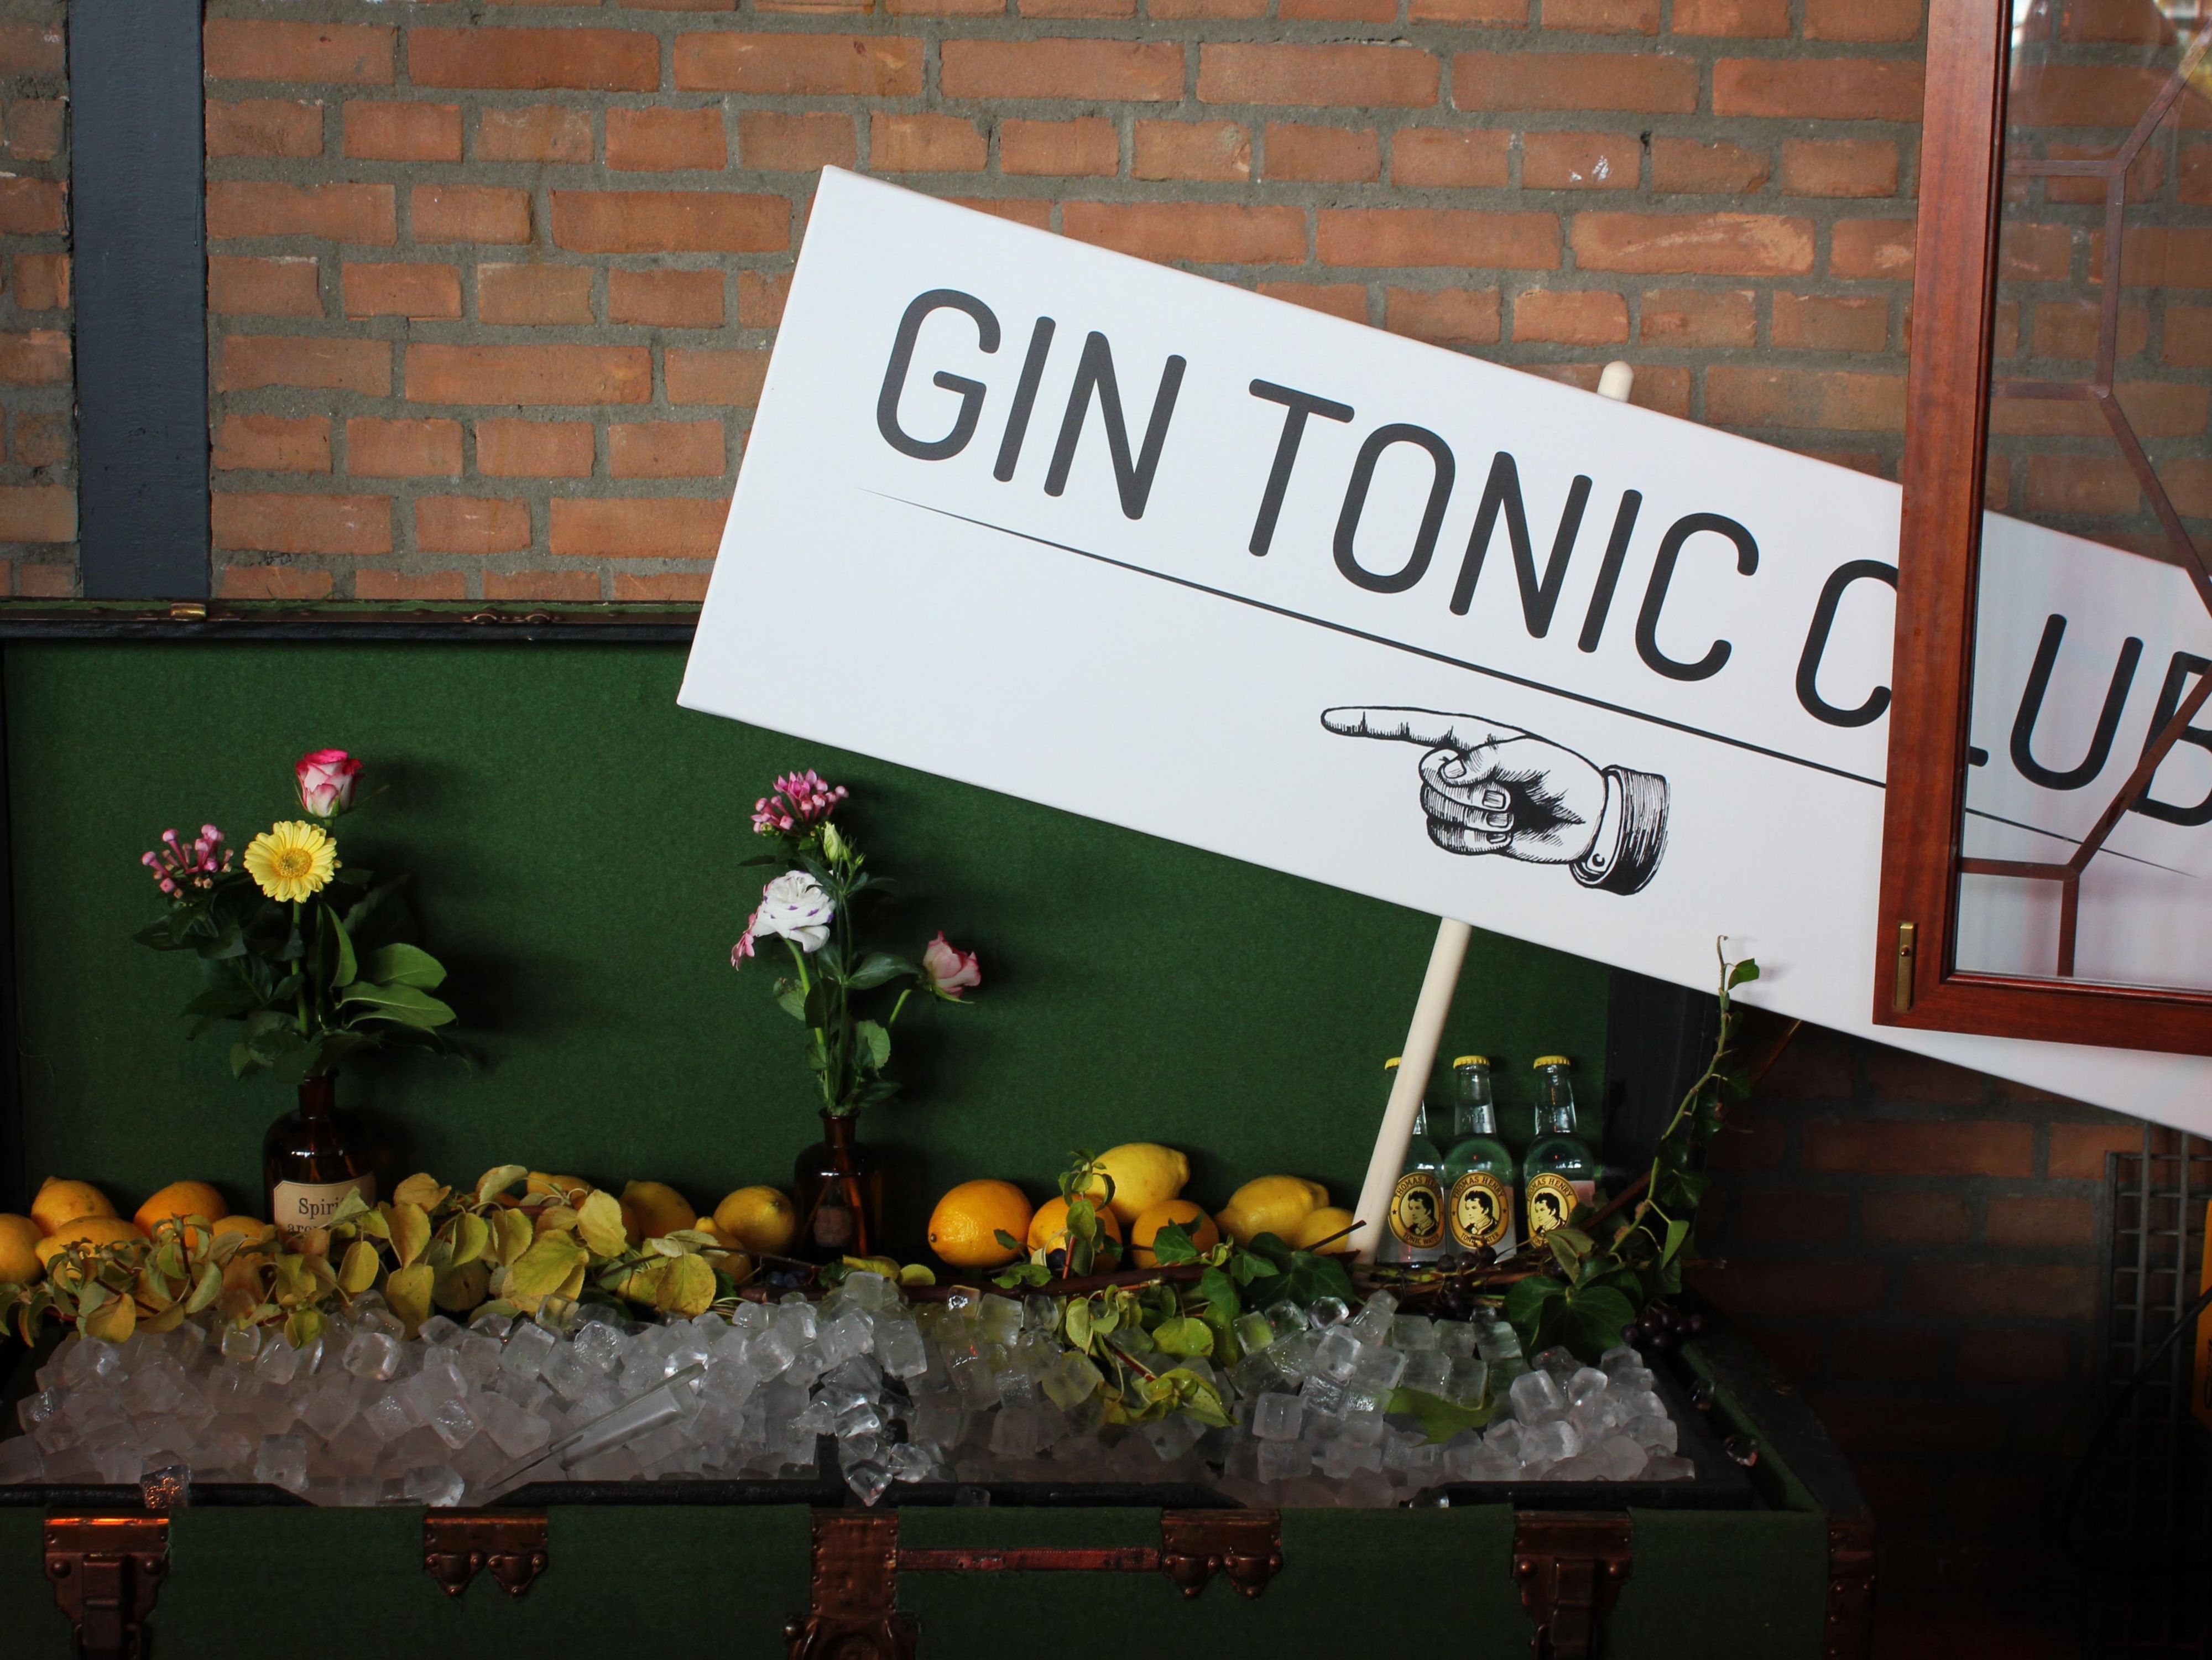 Are you coming to visit the local distillery?
Stay with us on your visit and get a complimentary gin and tonic when dining in our restaurant after your tour!